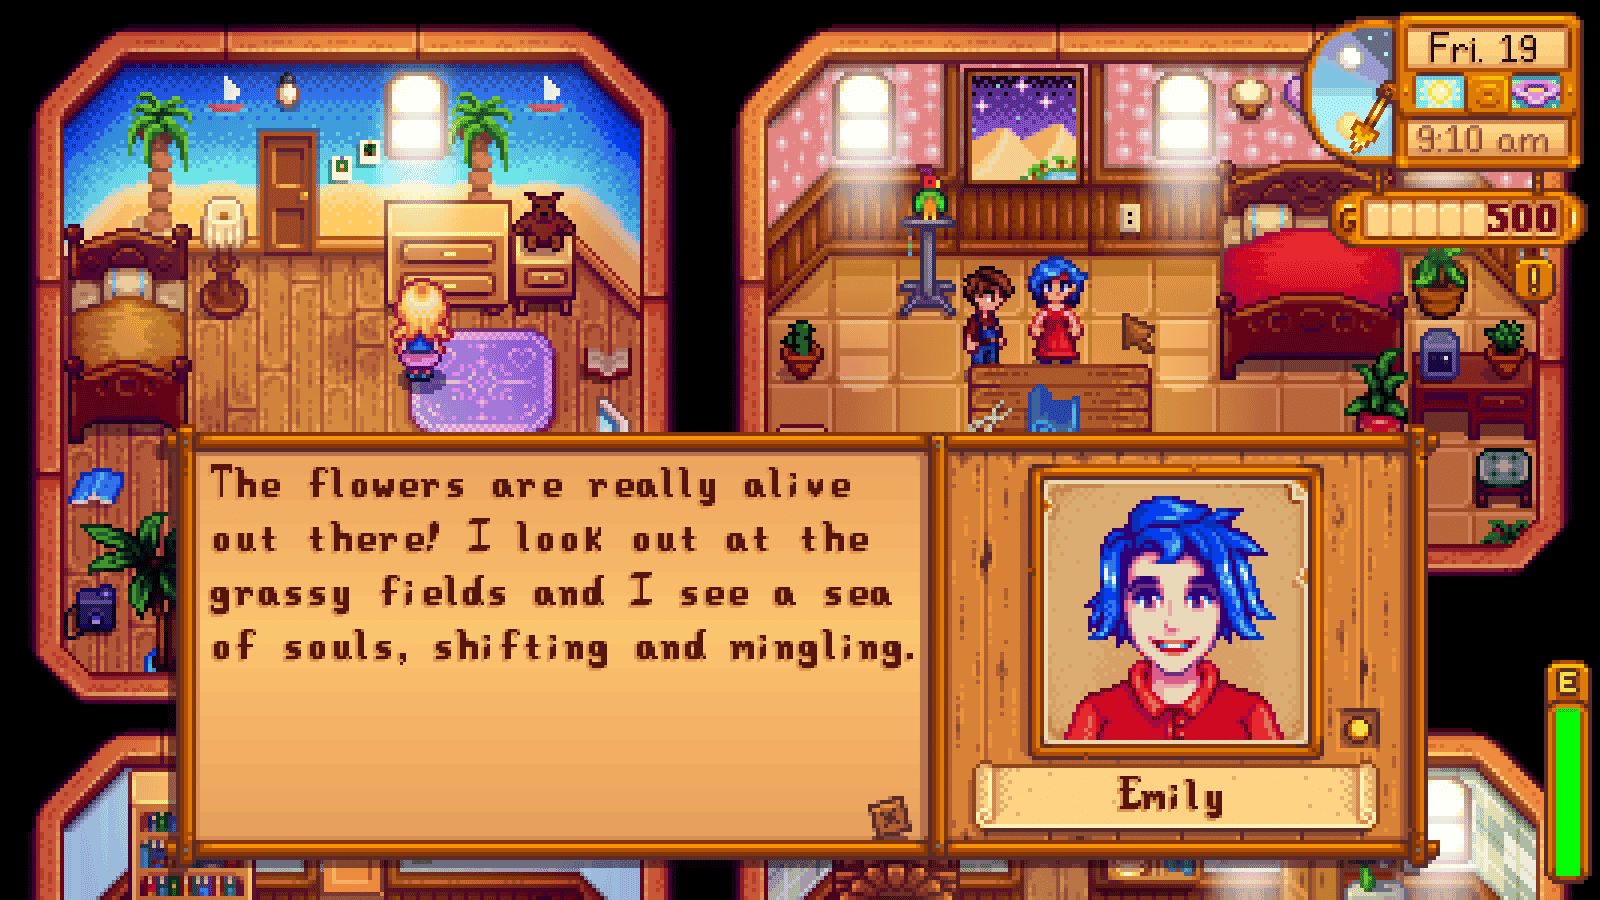 An example of the new dialogue with Emily